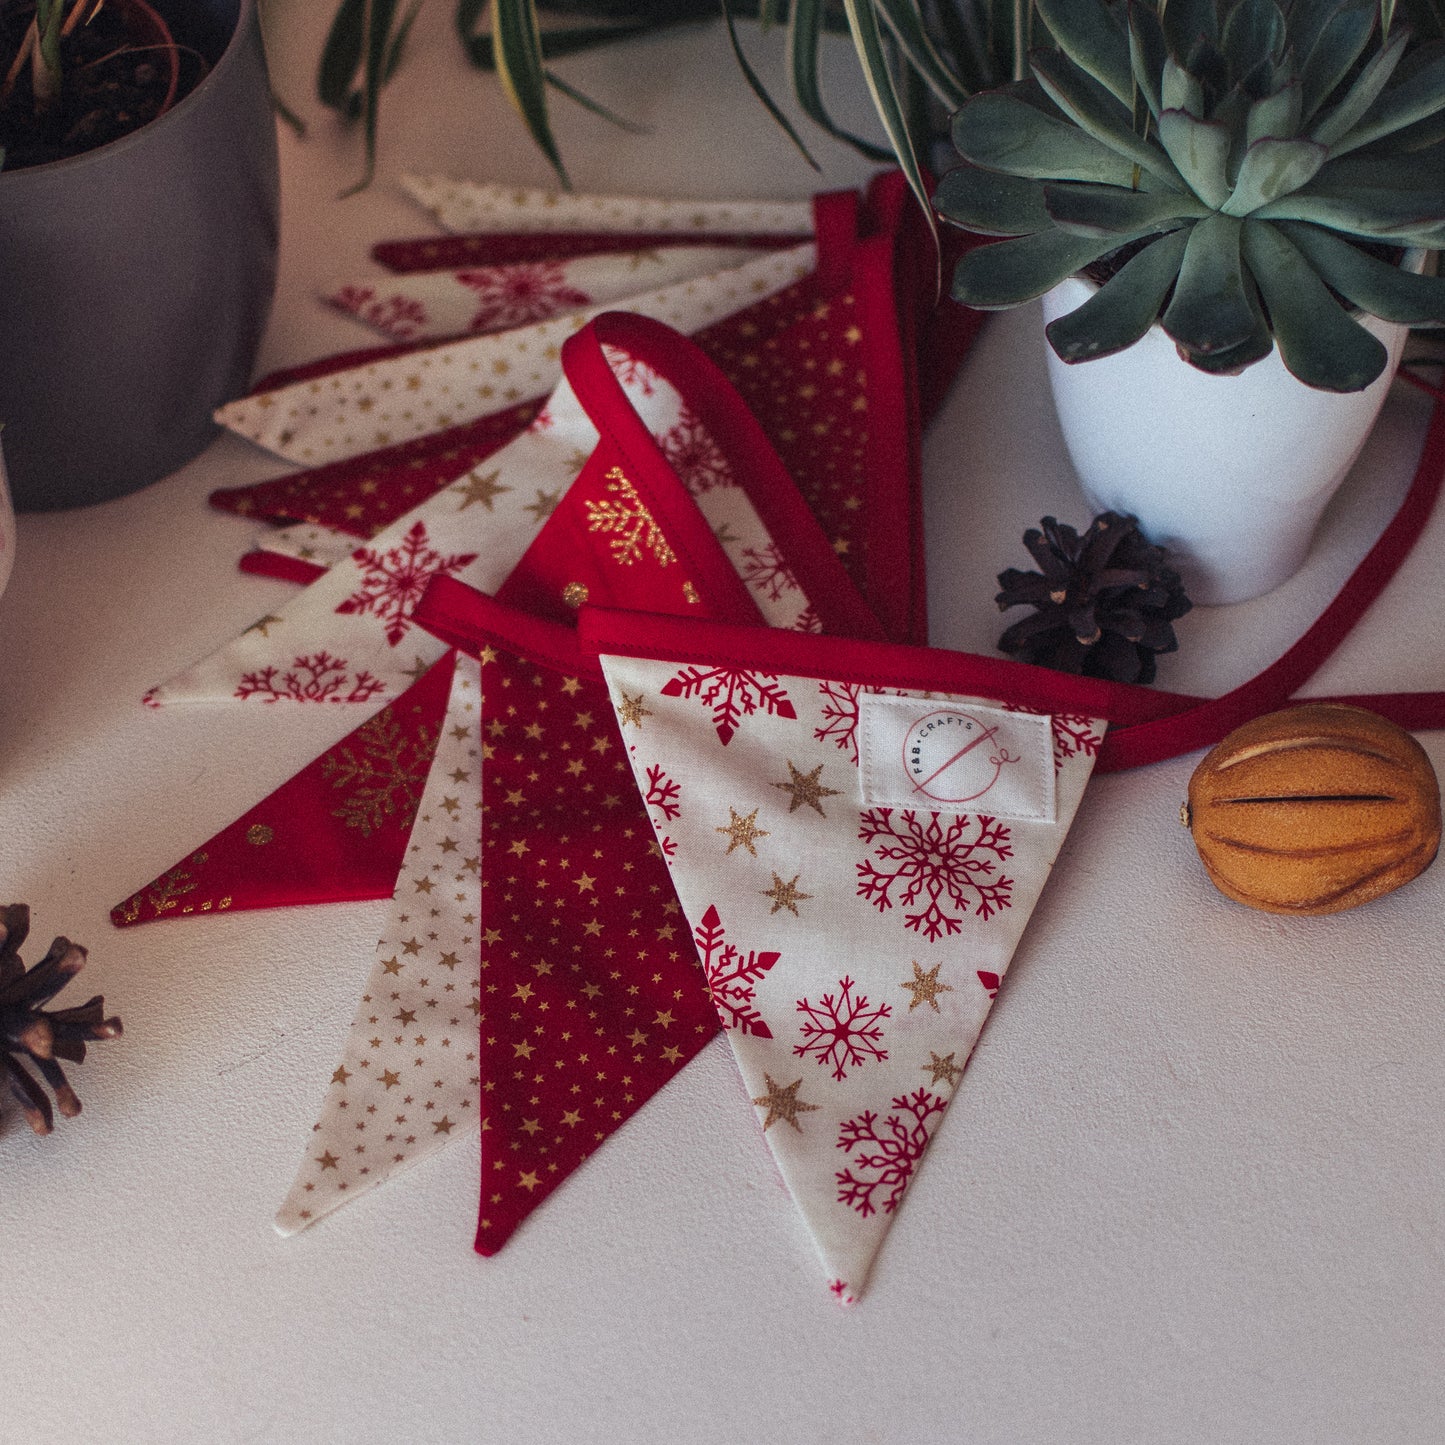 F&B Crafts red and Cream Festive Fabric with red and gold glitter snowflakes and stars 